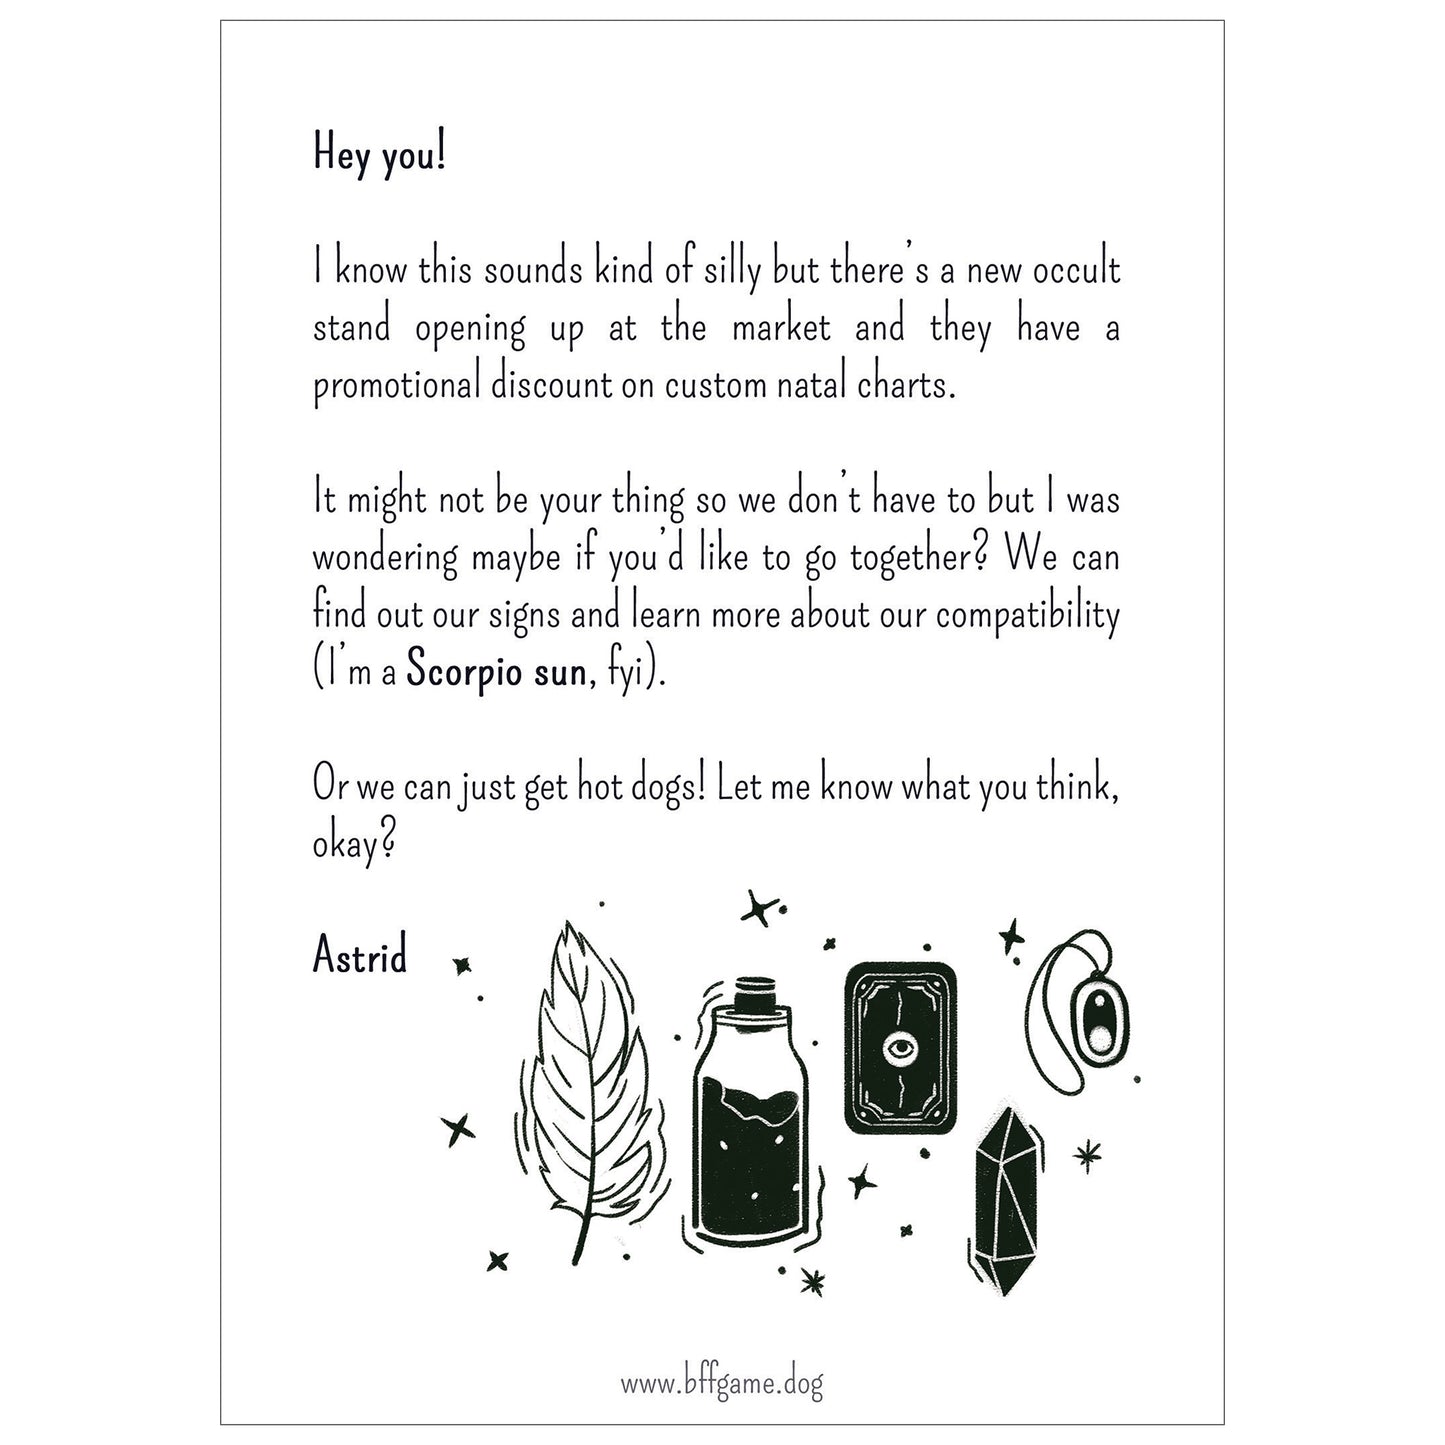 Mockup of a letter signed "Astrid" with stylized black and white drawings of a feather, a potion, a tarot card, an amulet, and a crystal, surrounded by sparkles. White background.